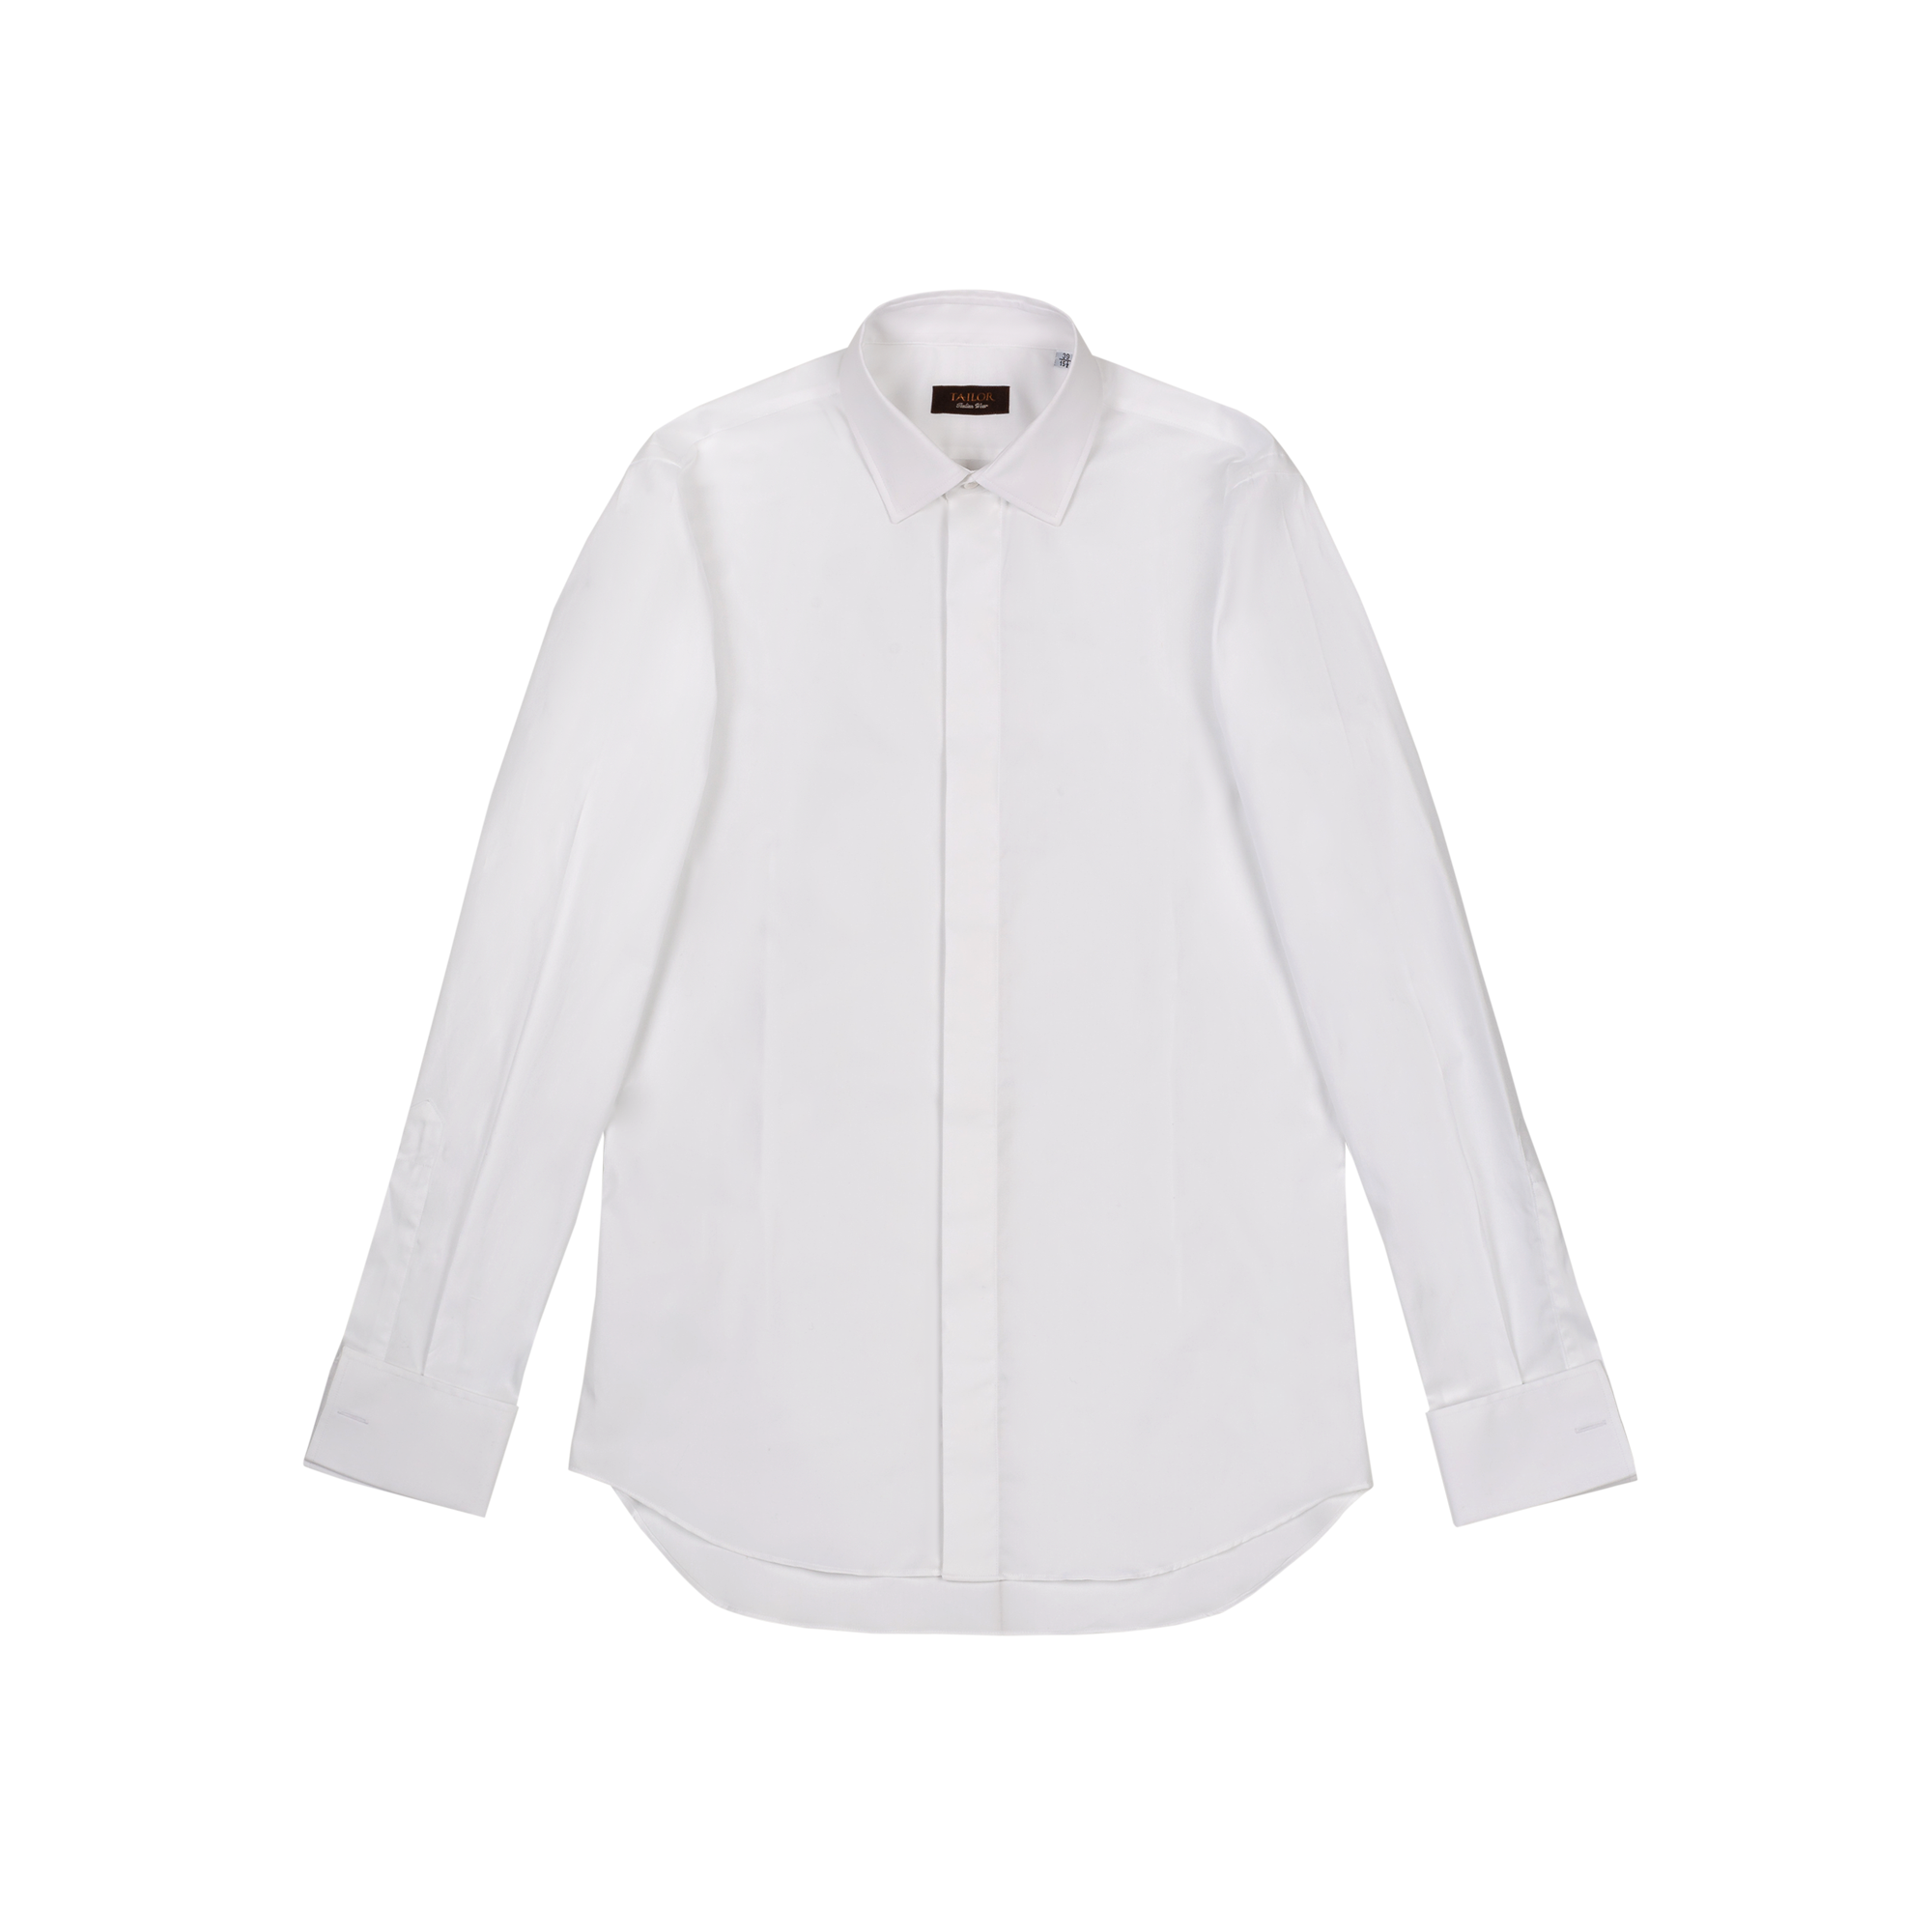 White Shirt with double cuffs